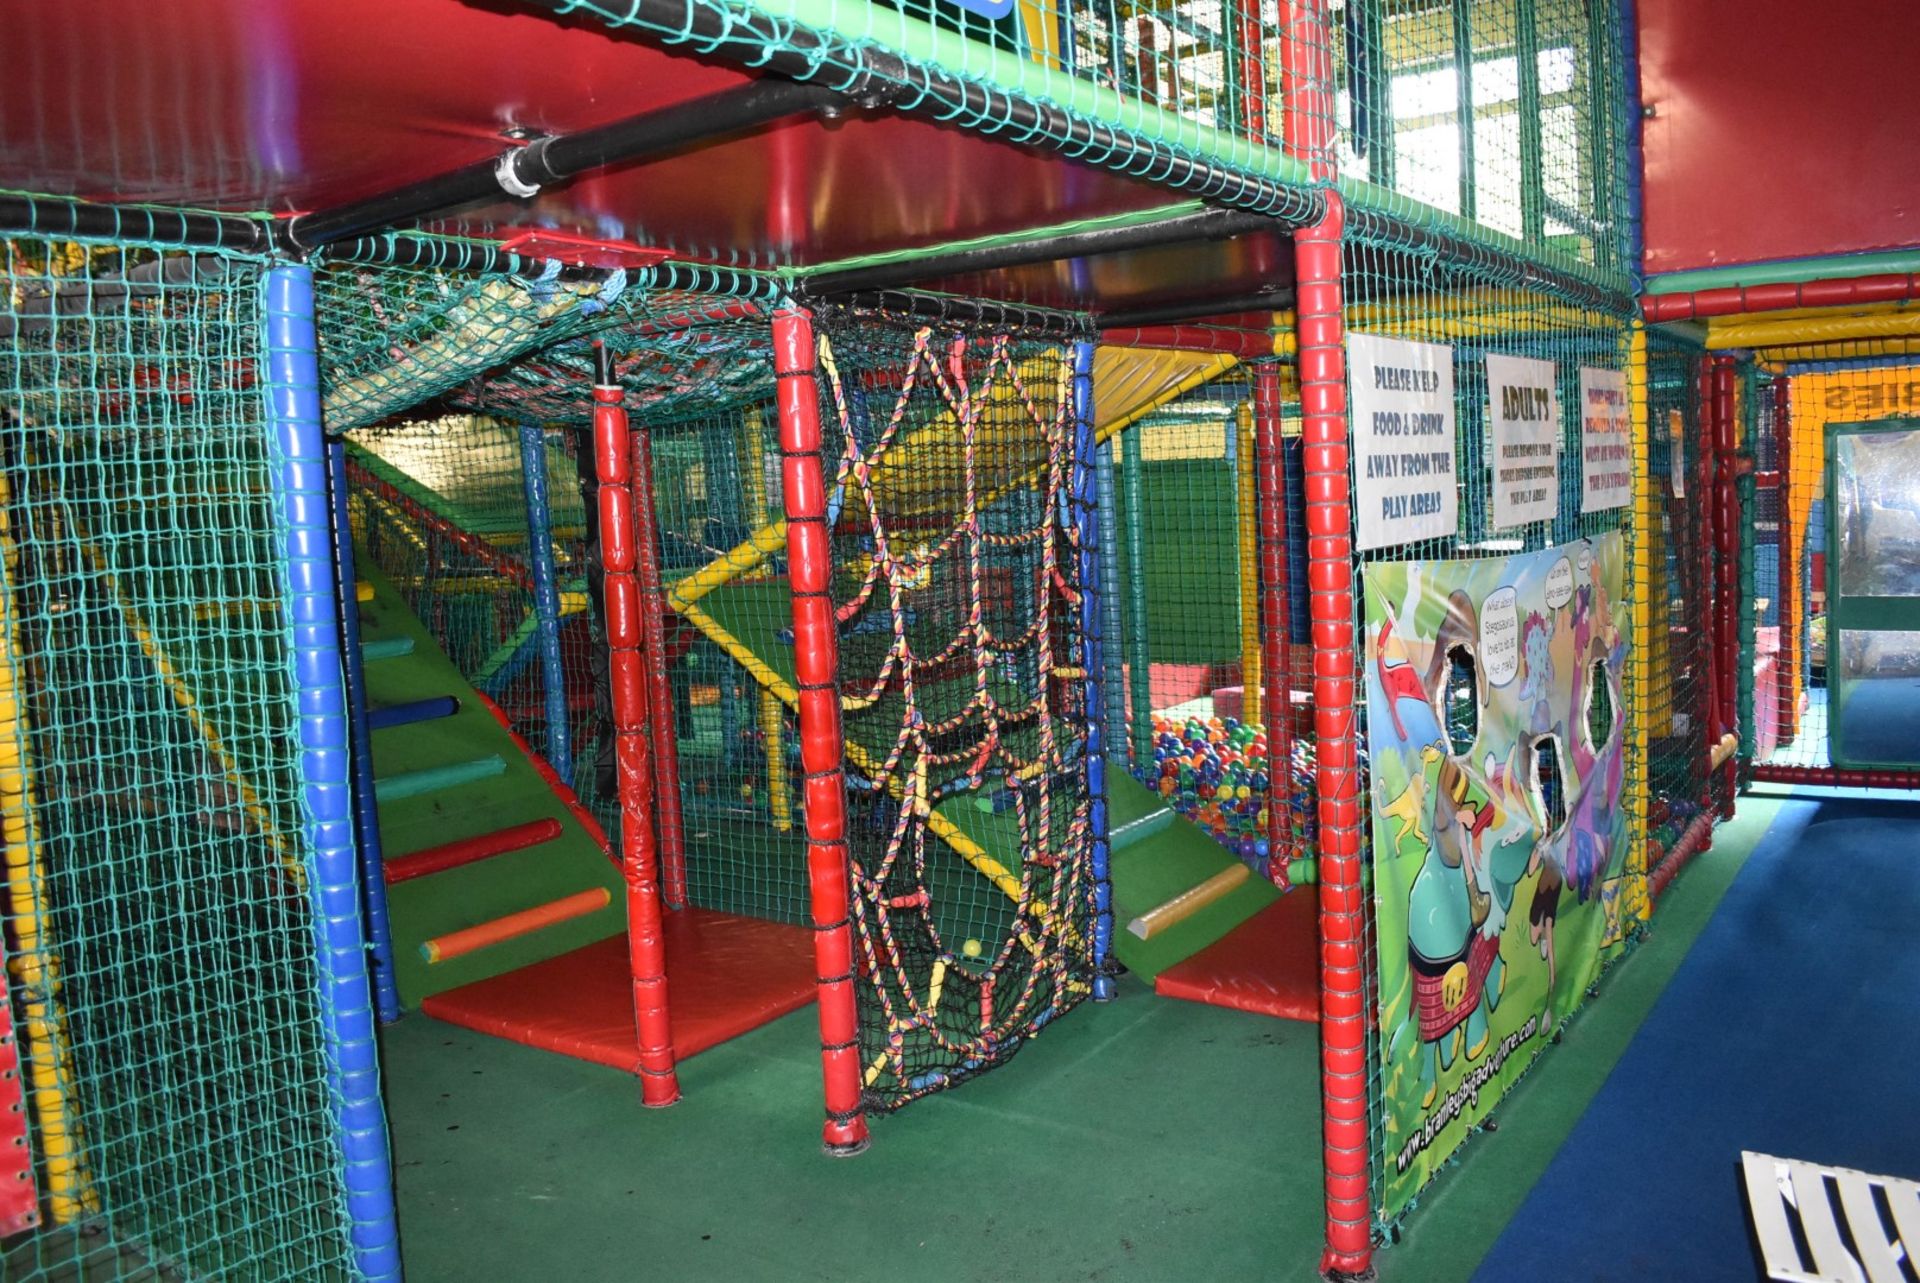 Bramleys Big Adventure Playground - Giant Action-Packed Playcentre With Slides, Zip Line Swings, - Image 86 of 128